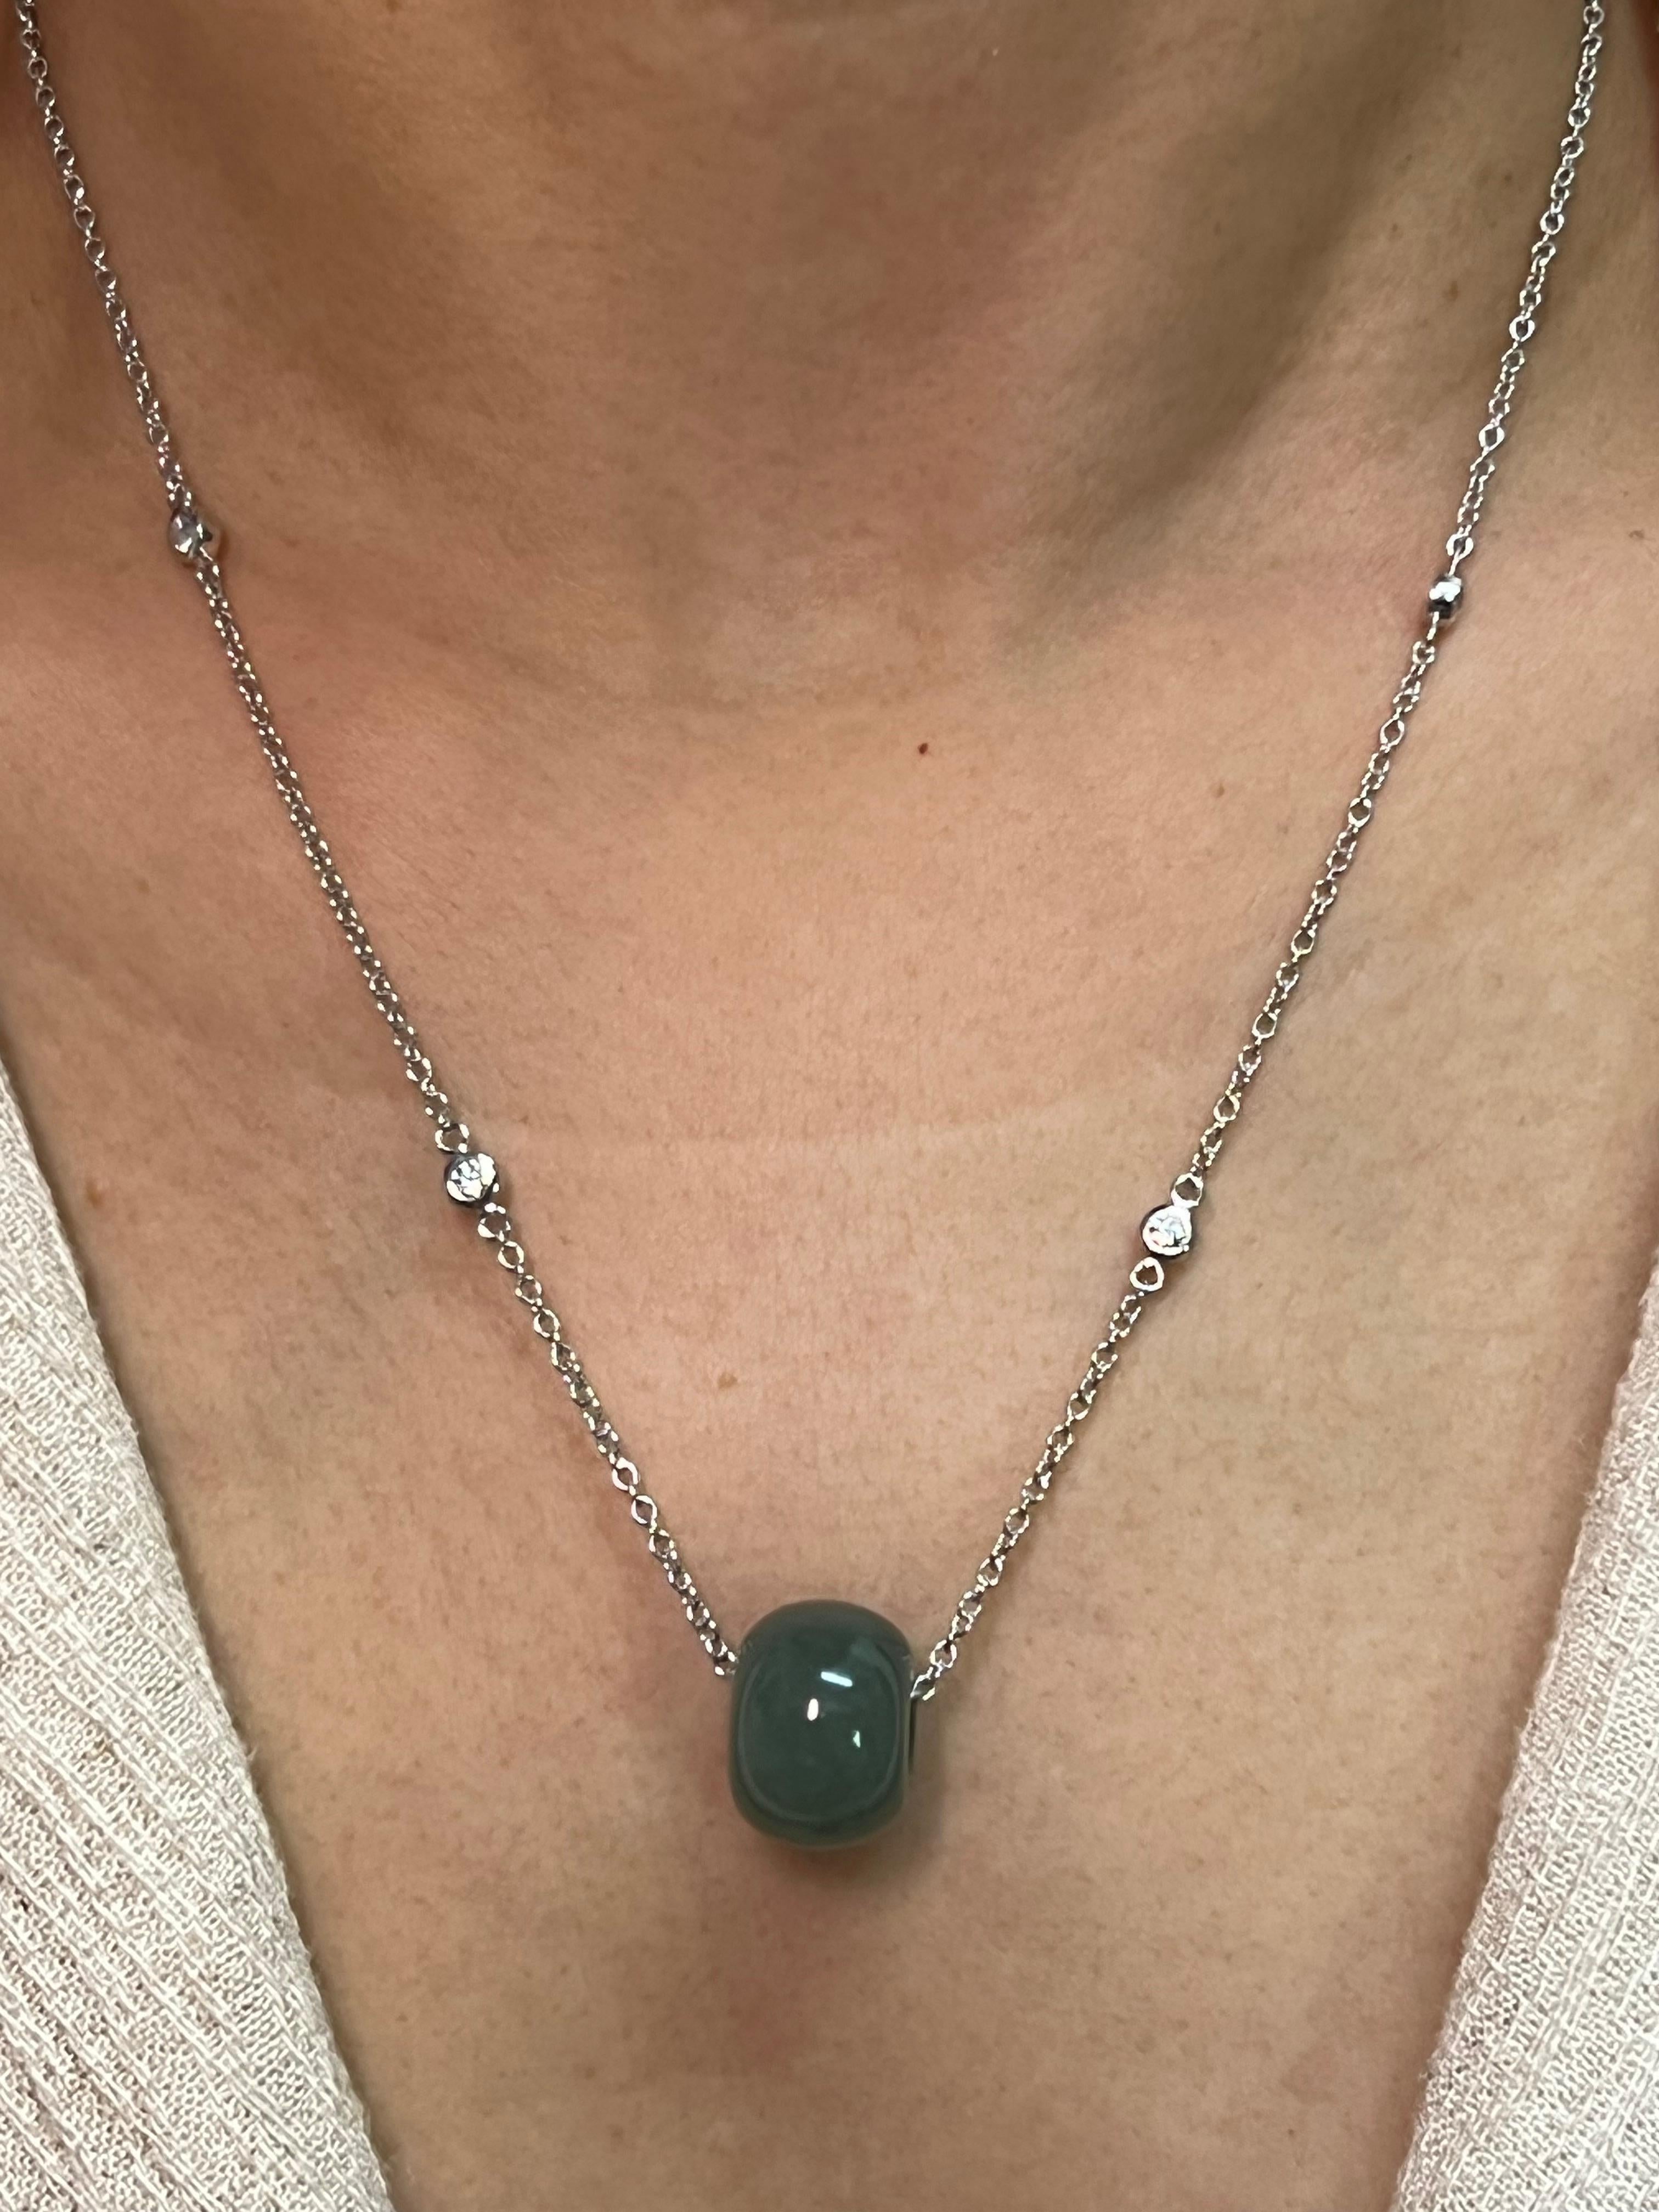 Please check out the HD video! Here is a nice Jade donut pendant with a custom diamond necklace. The jade's outer diameter is almost 15mm. The adjustable 16 and 18 inch necklace is set in 18k white gold and diamonds. There are 4 white diamonds